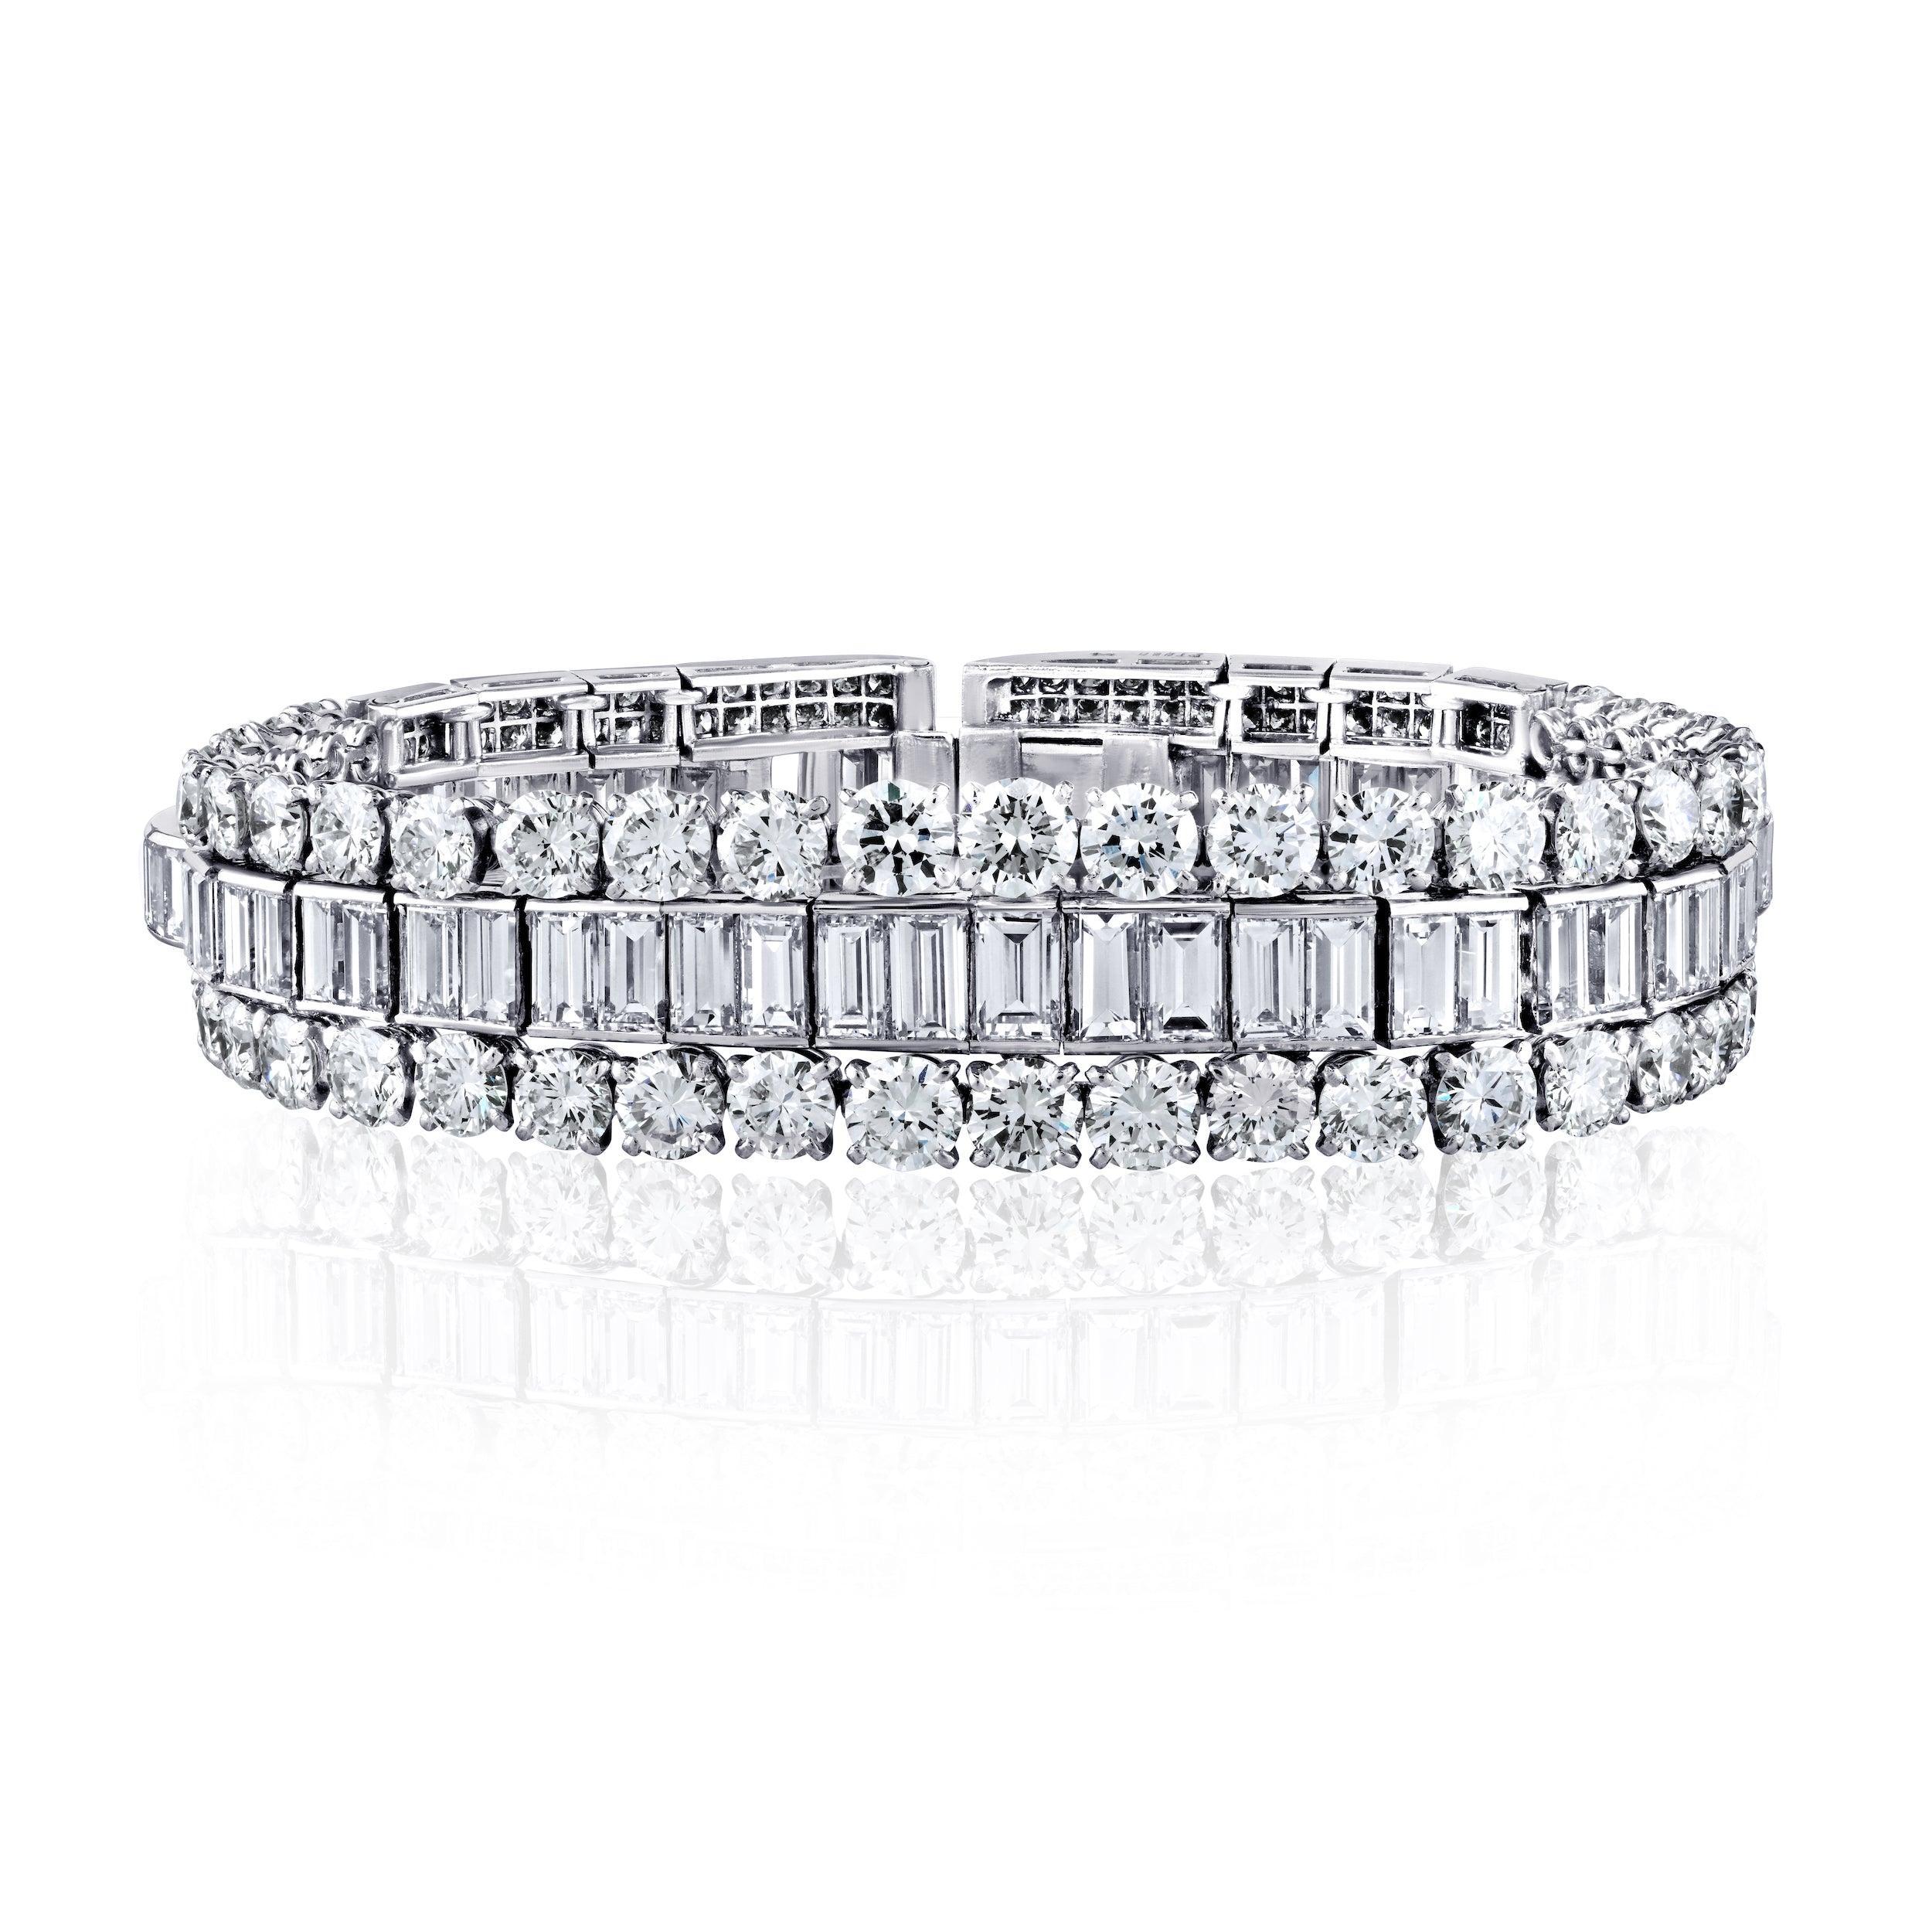 Indulge in the allure of this unique, one-of-a-kind bracelet. Set with eye-clean, E-F color natural diamonds, showcasing a total of 45 carats in diamonds.

Crafted with meticulous attention to detail, the bracelet features a seamless design that